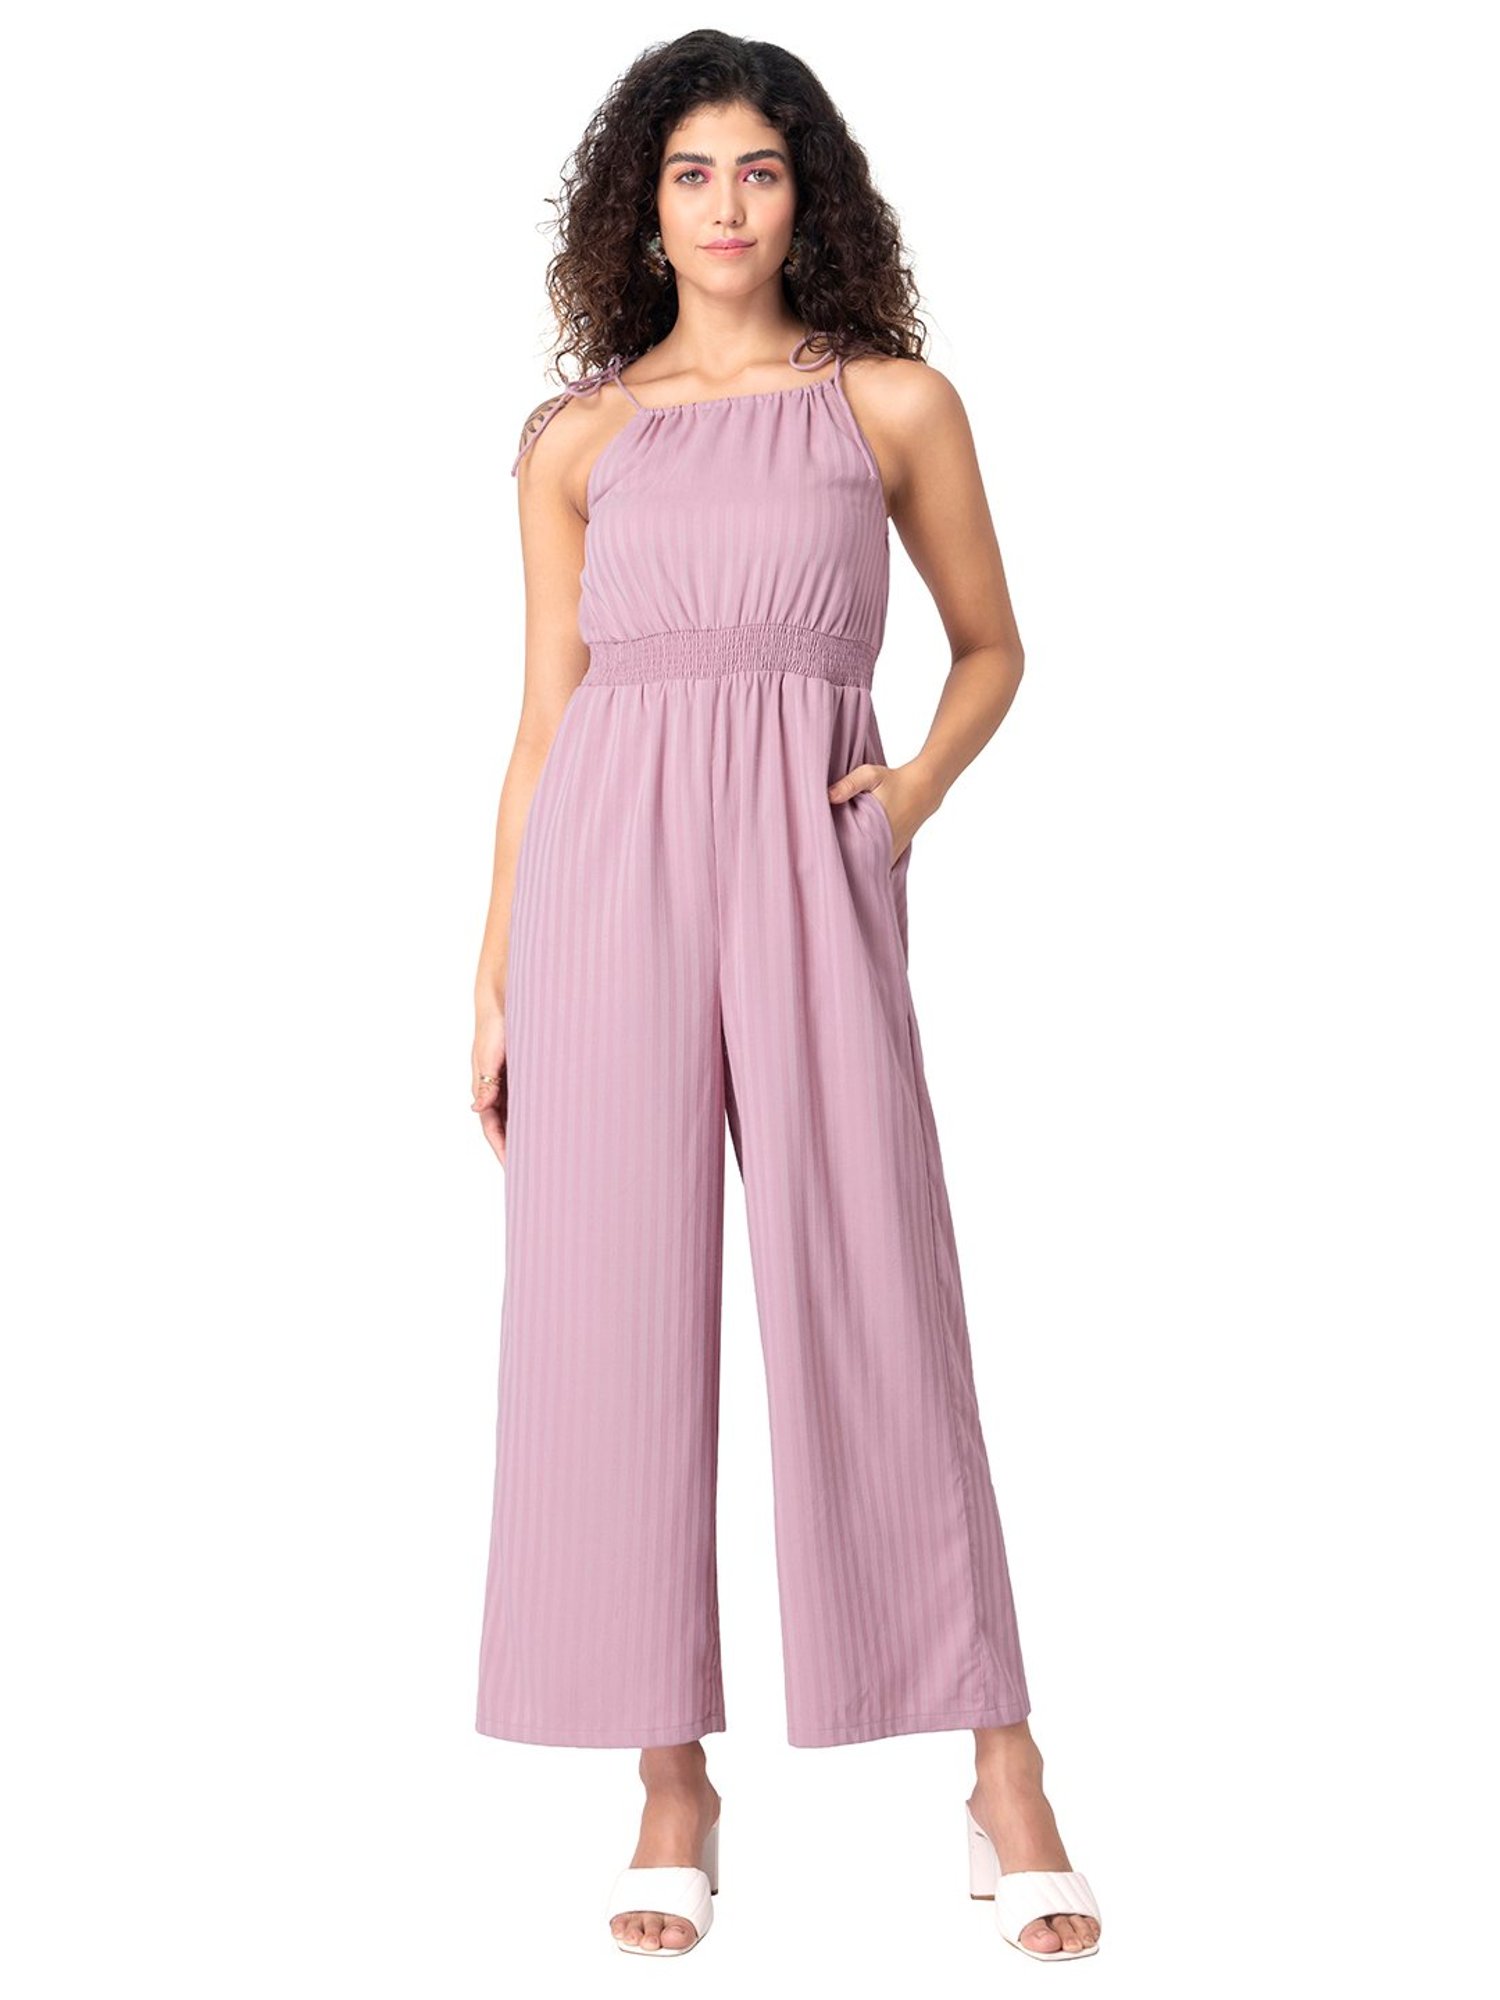 Faballey Pink Solid Jumpsuit - Buy Faballey Pink Solid Jumpsuit online in  India